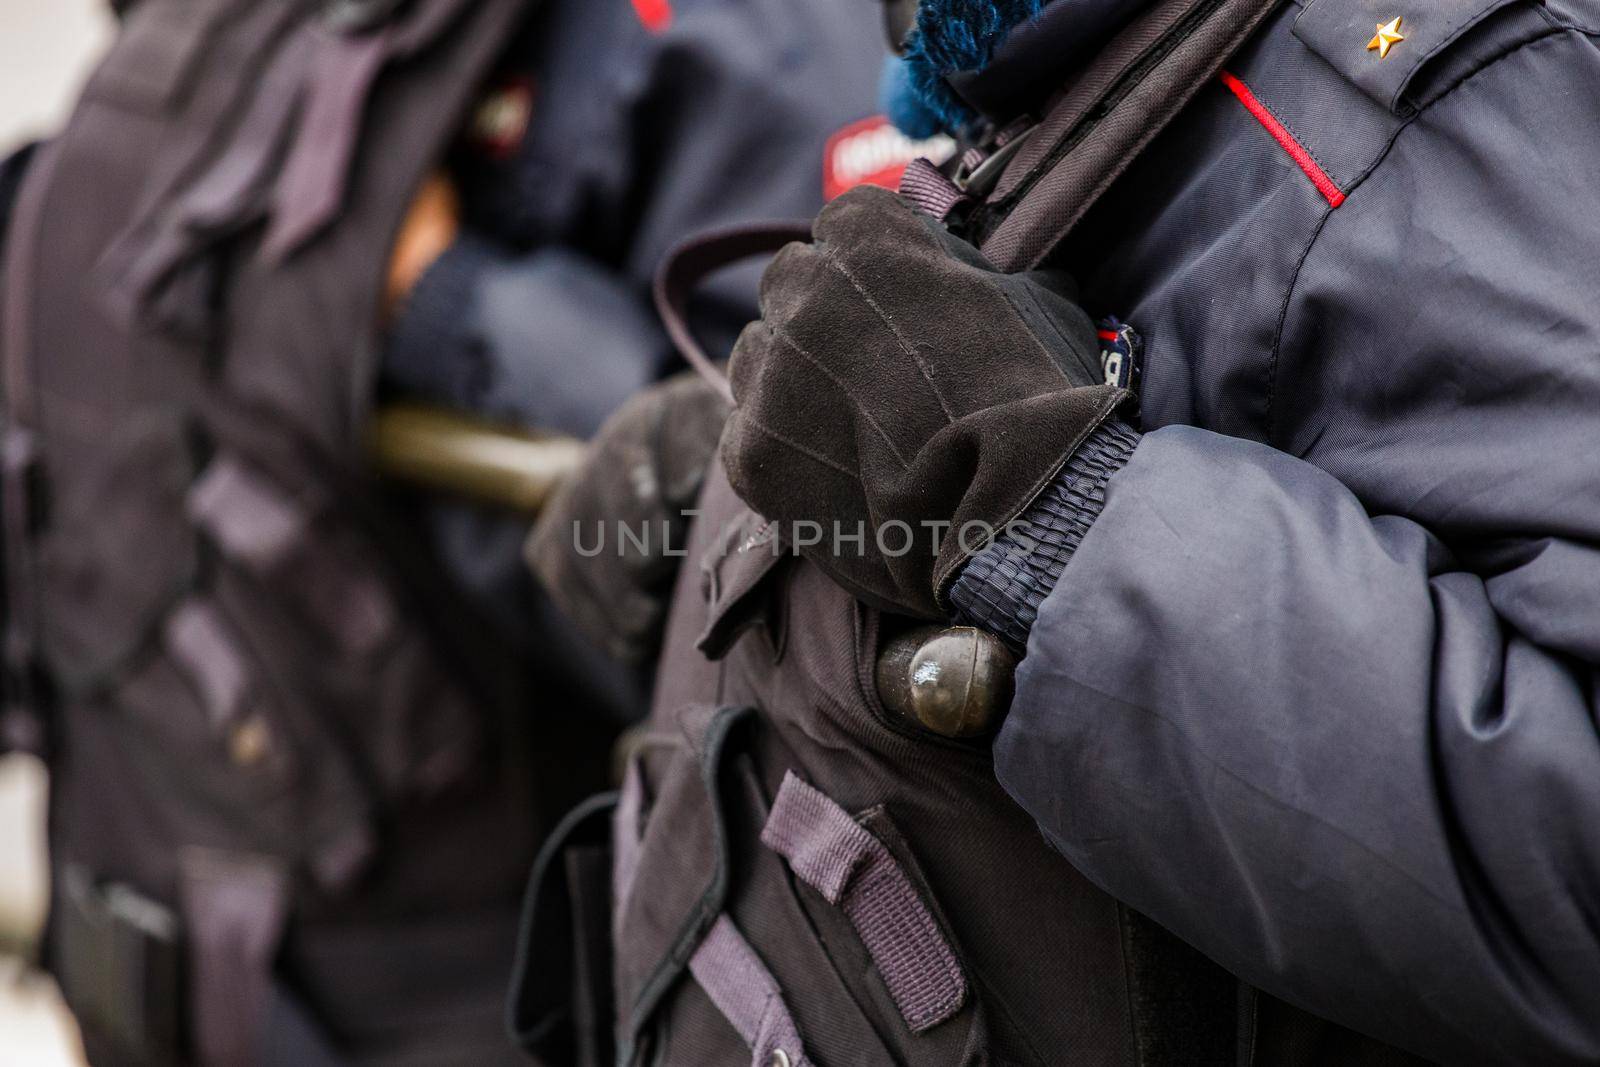 Tula, Russia - January 23, 2021: Police officers in black uniform with bulletproof vests - close-up view on black gloves with background blur.